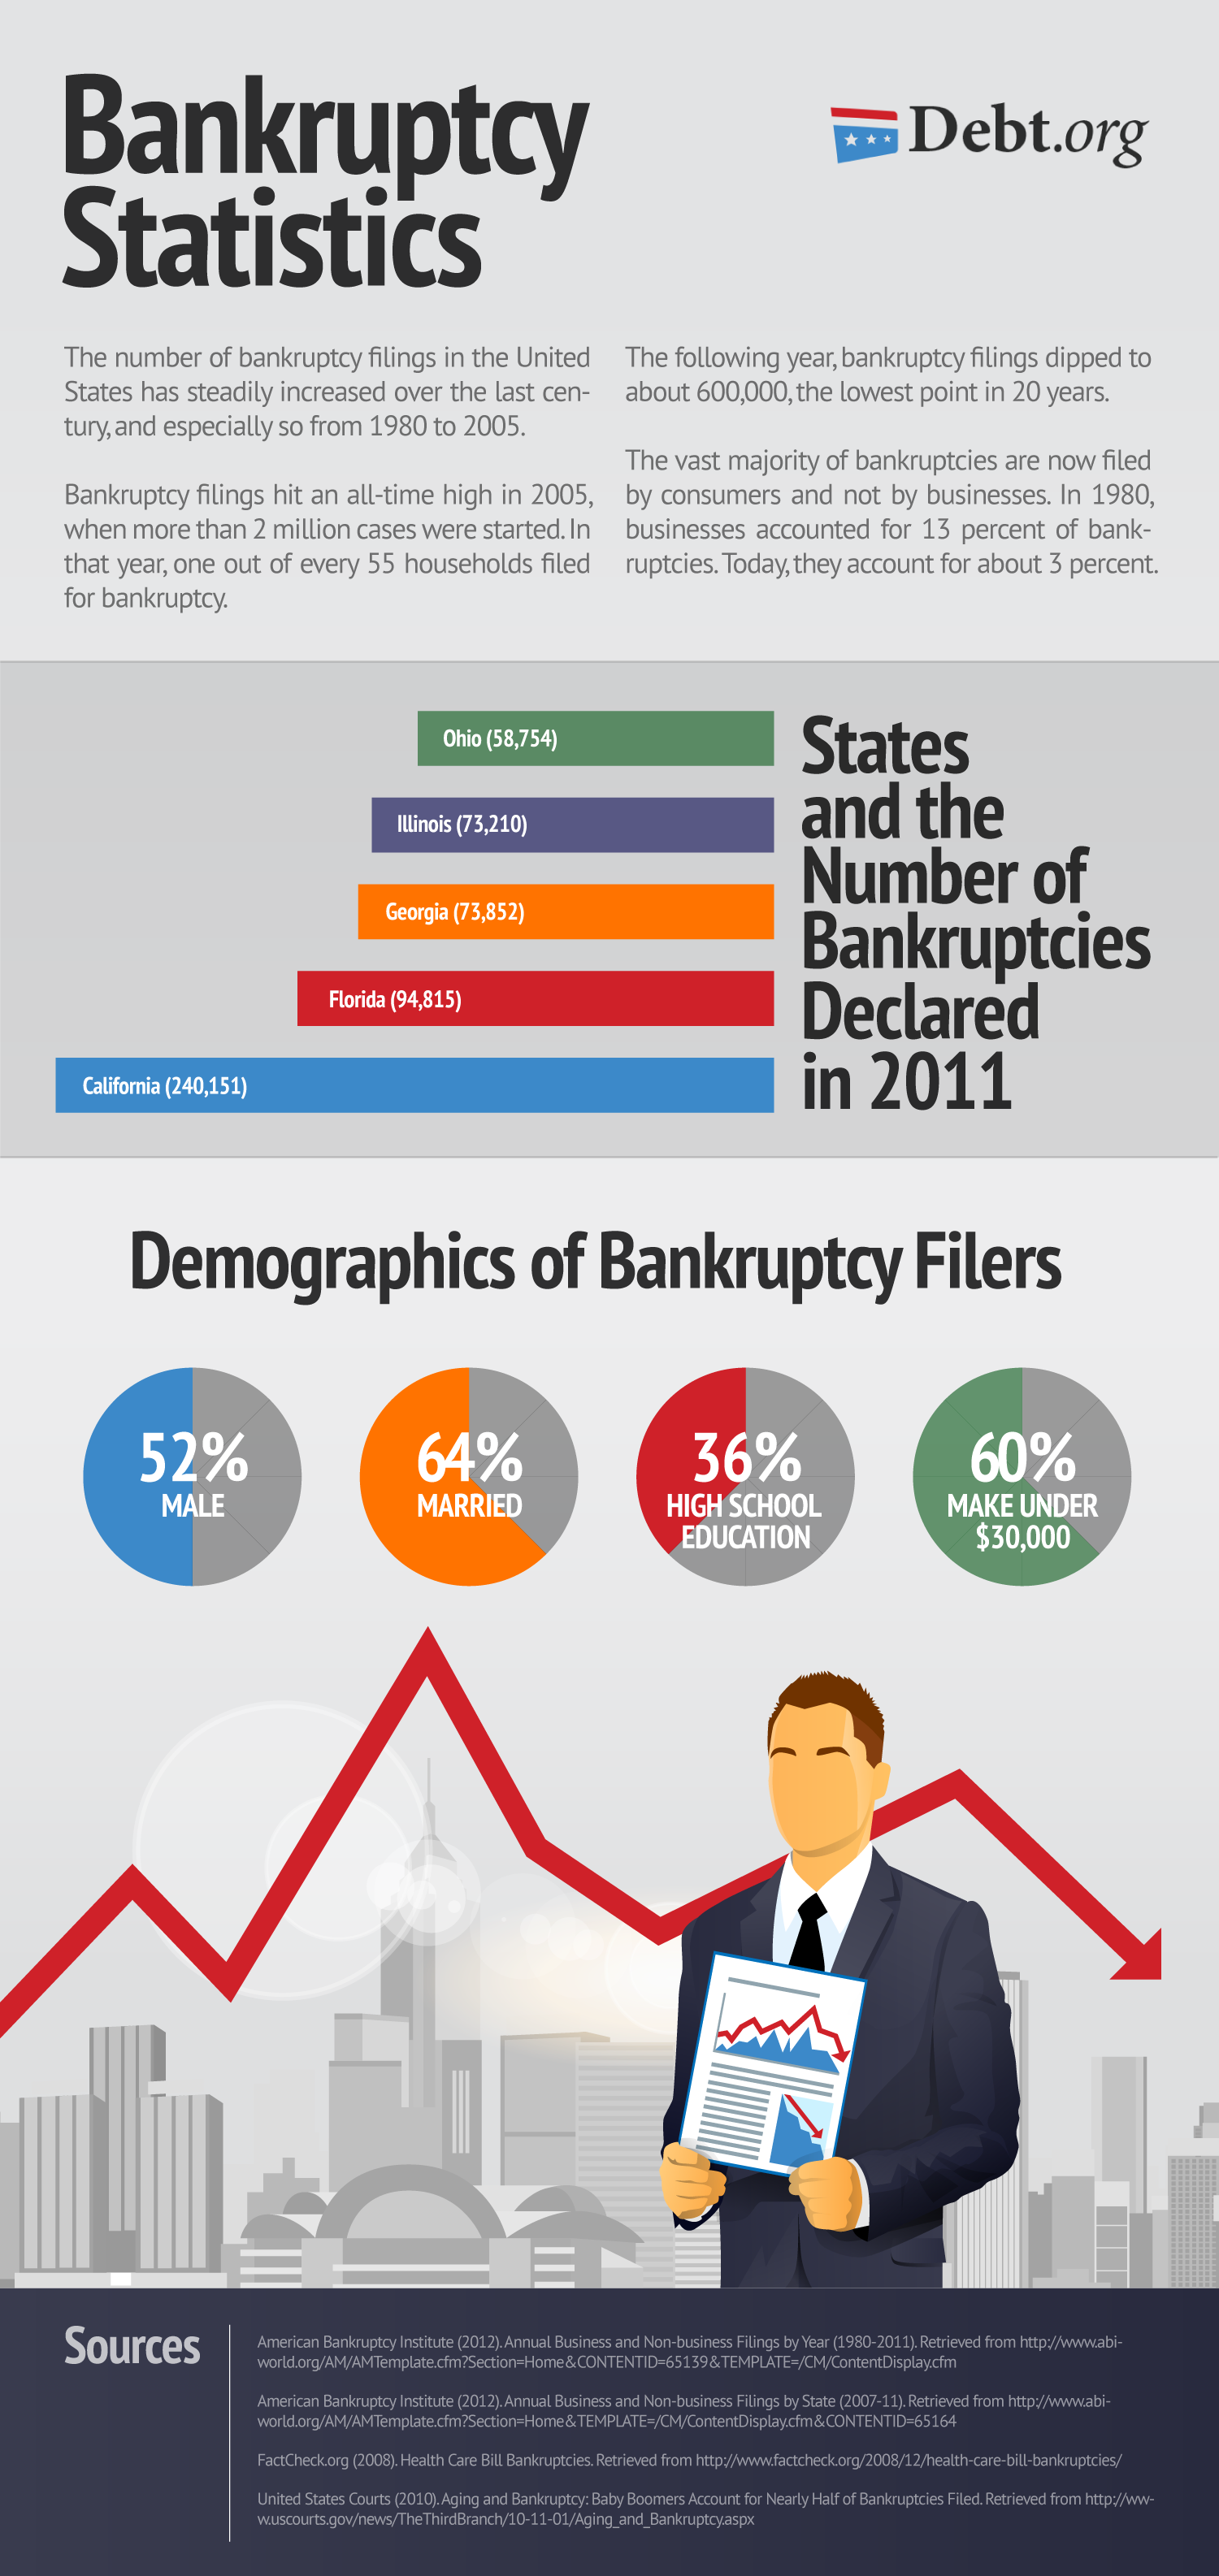 Business bankruptcies surge under impact of high interest rates